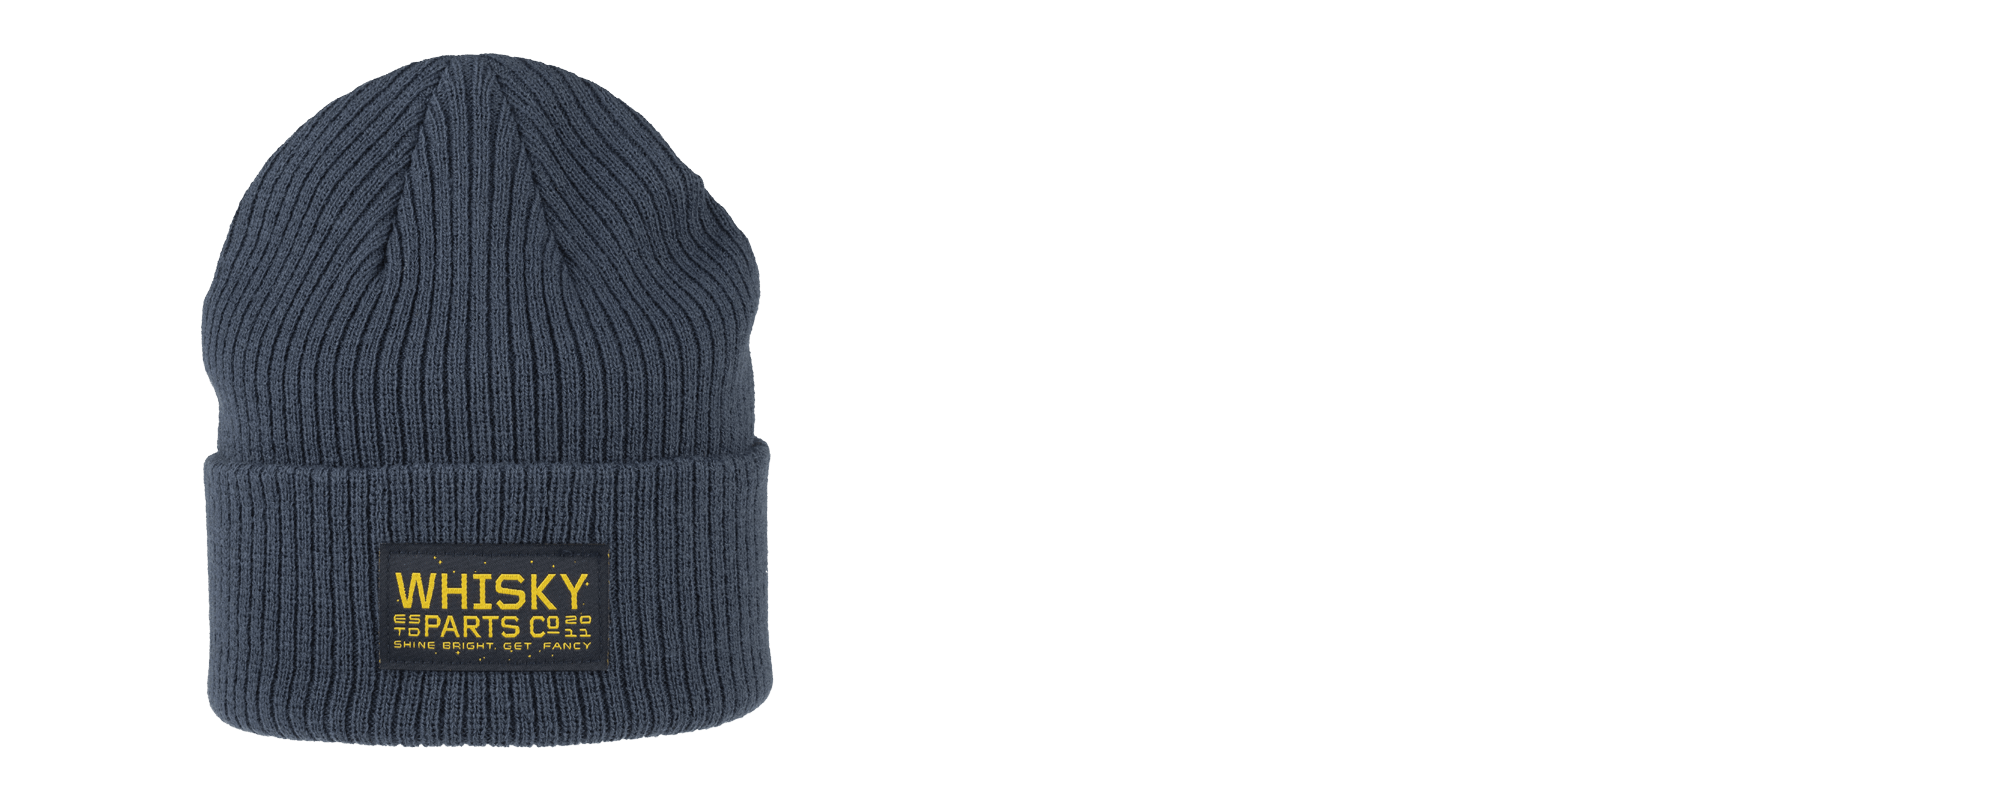 Whisky Stargazer Beanie - Storm - Front view with patch